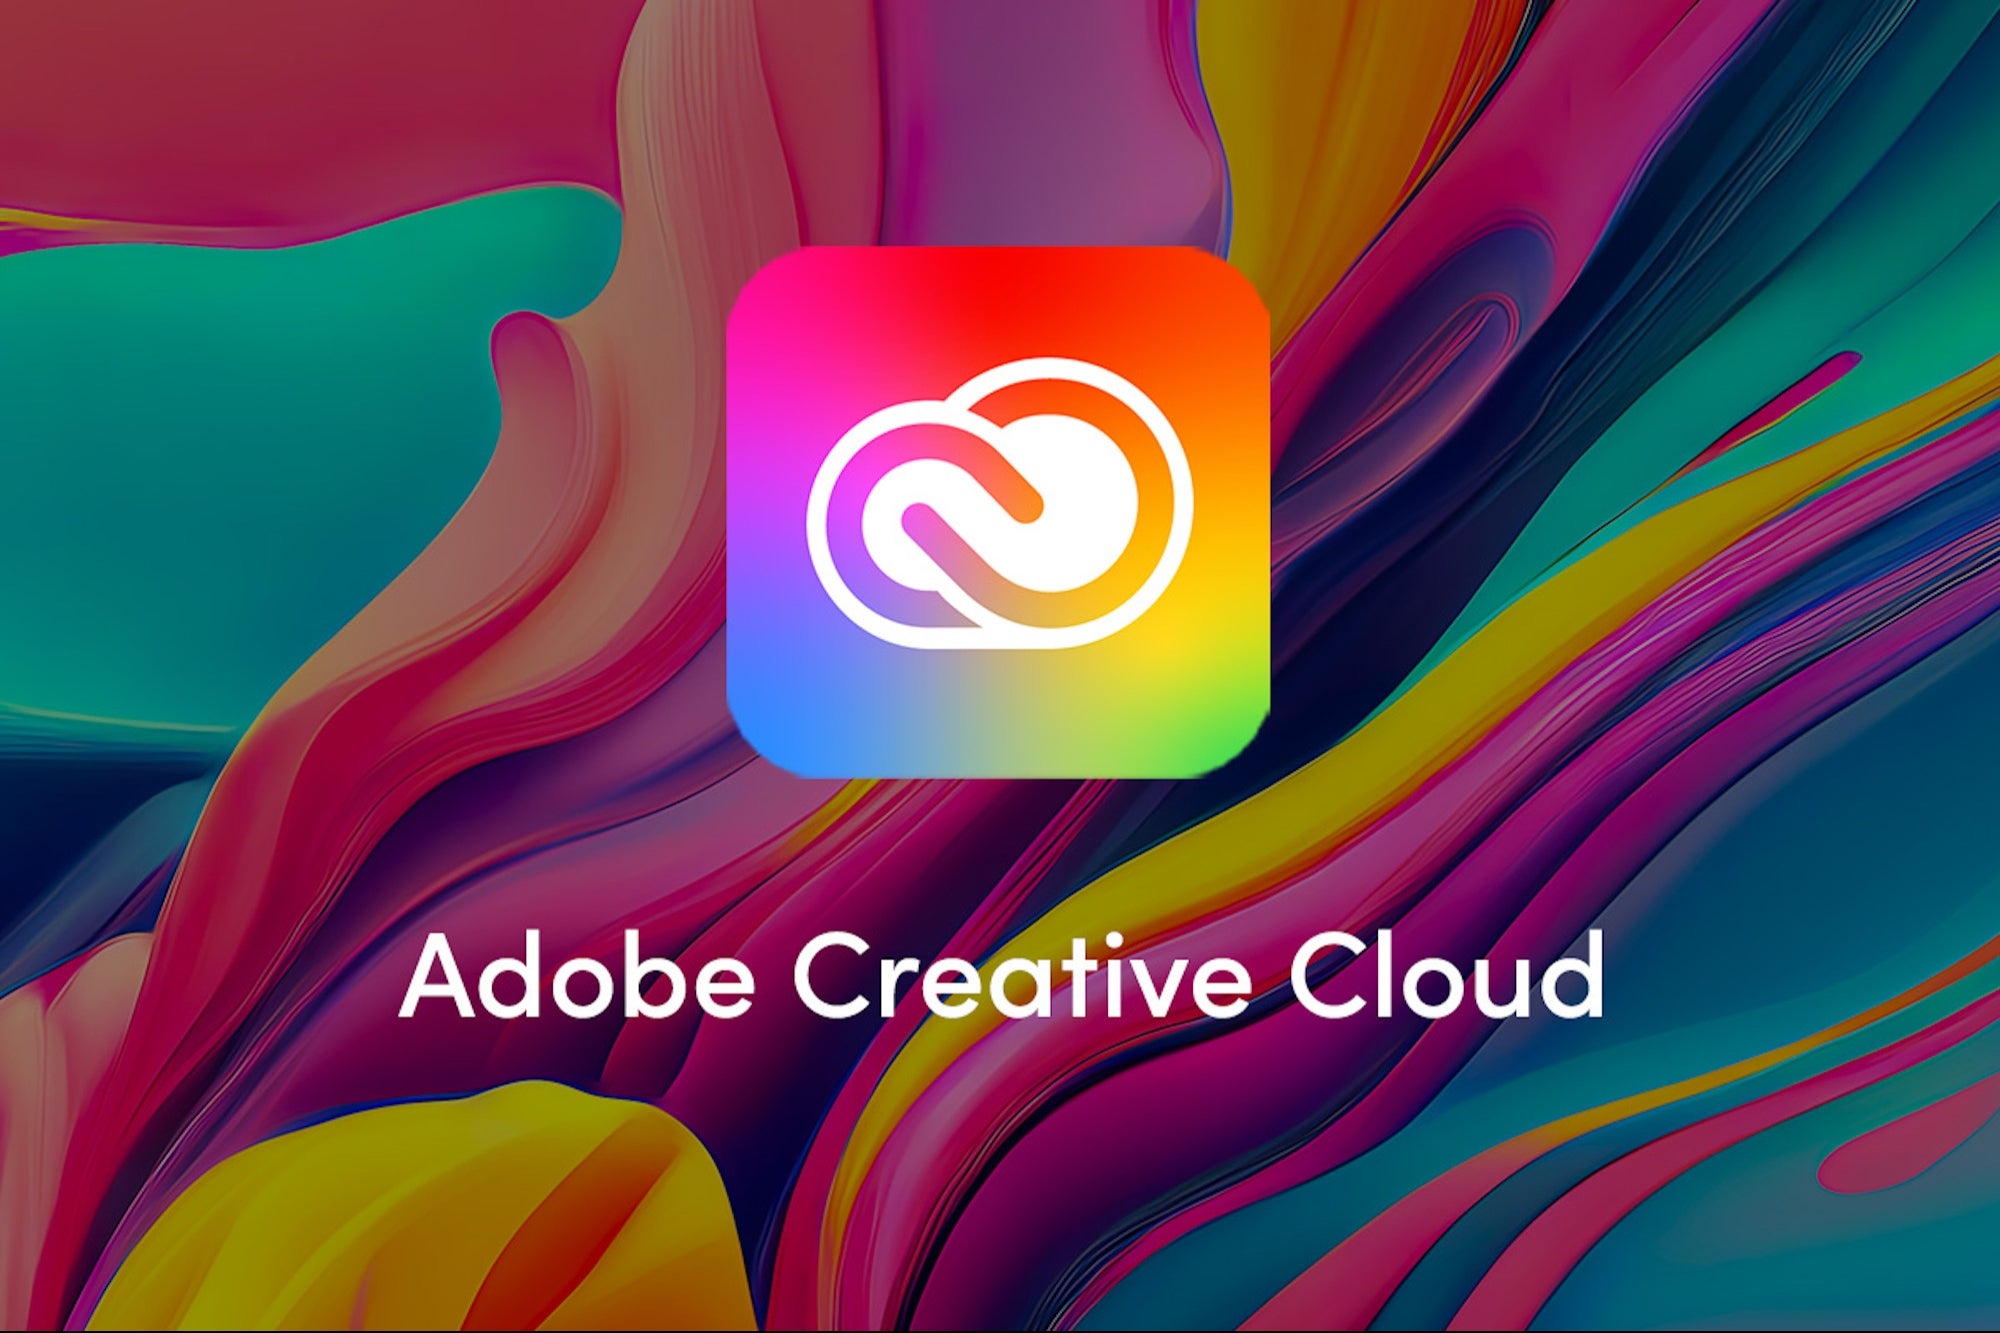 26 Adobe Creative Cloud Apps Only Cost 29.99 a Month With This Deal